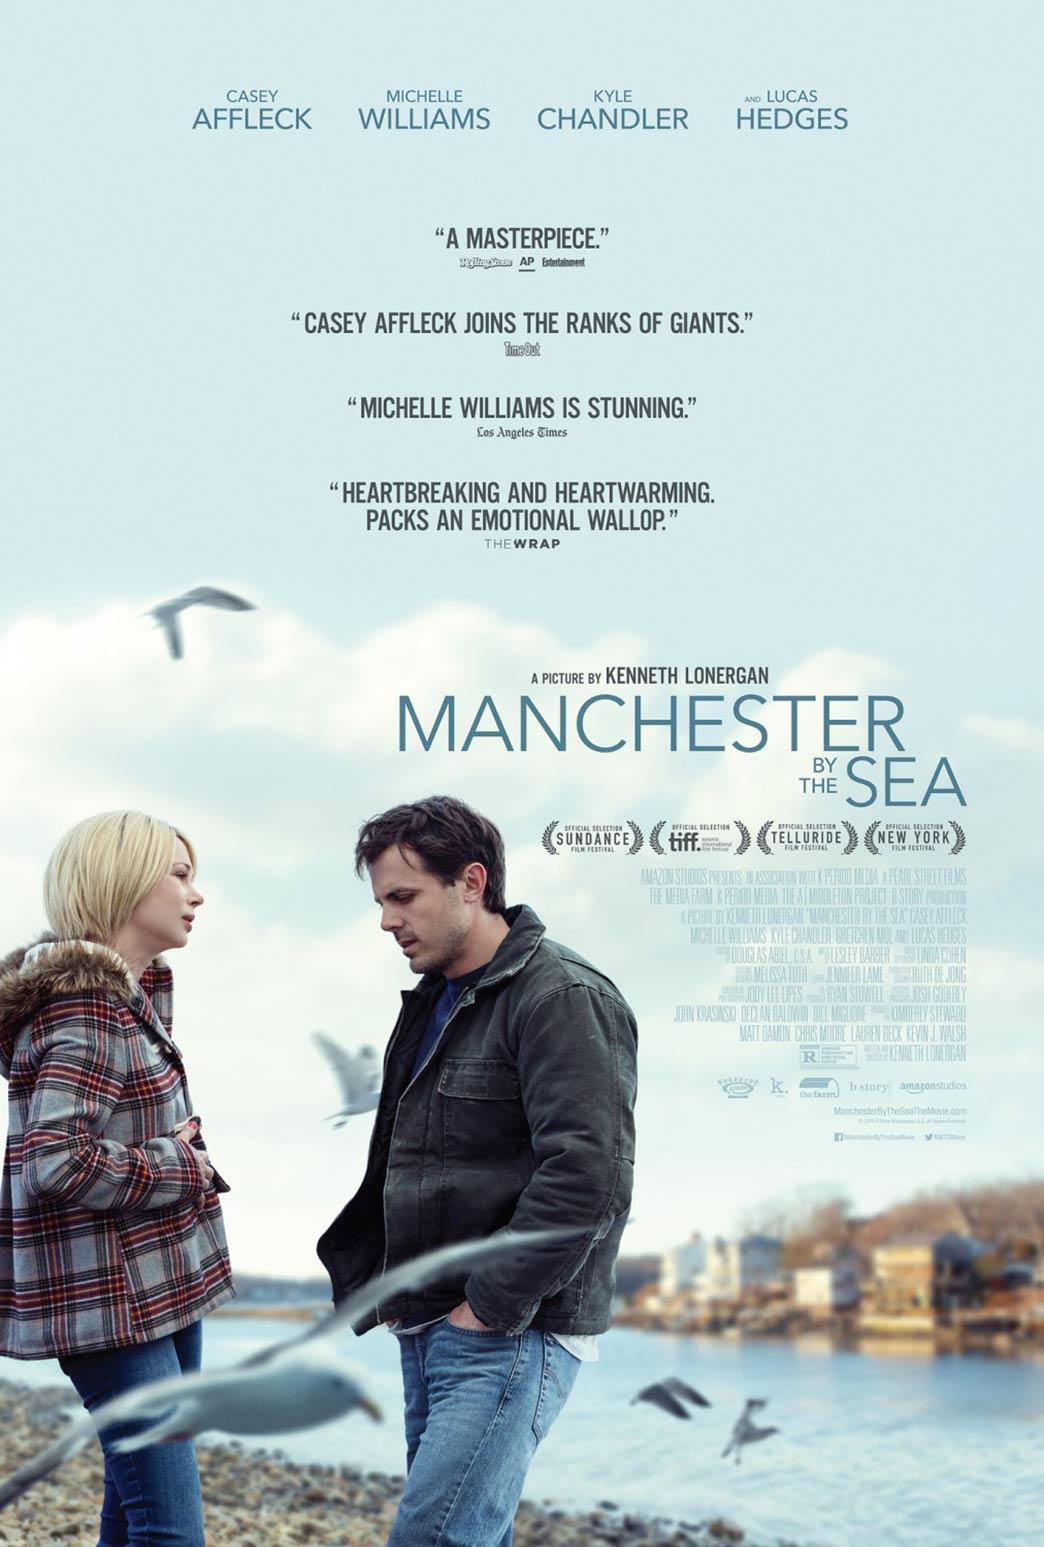 All Movie Posters and Prints for Manchester By The Sea